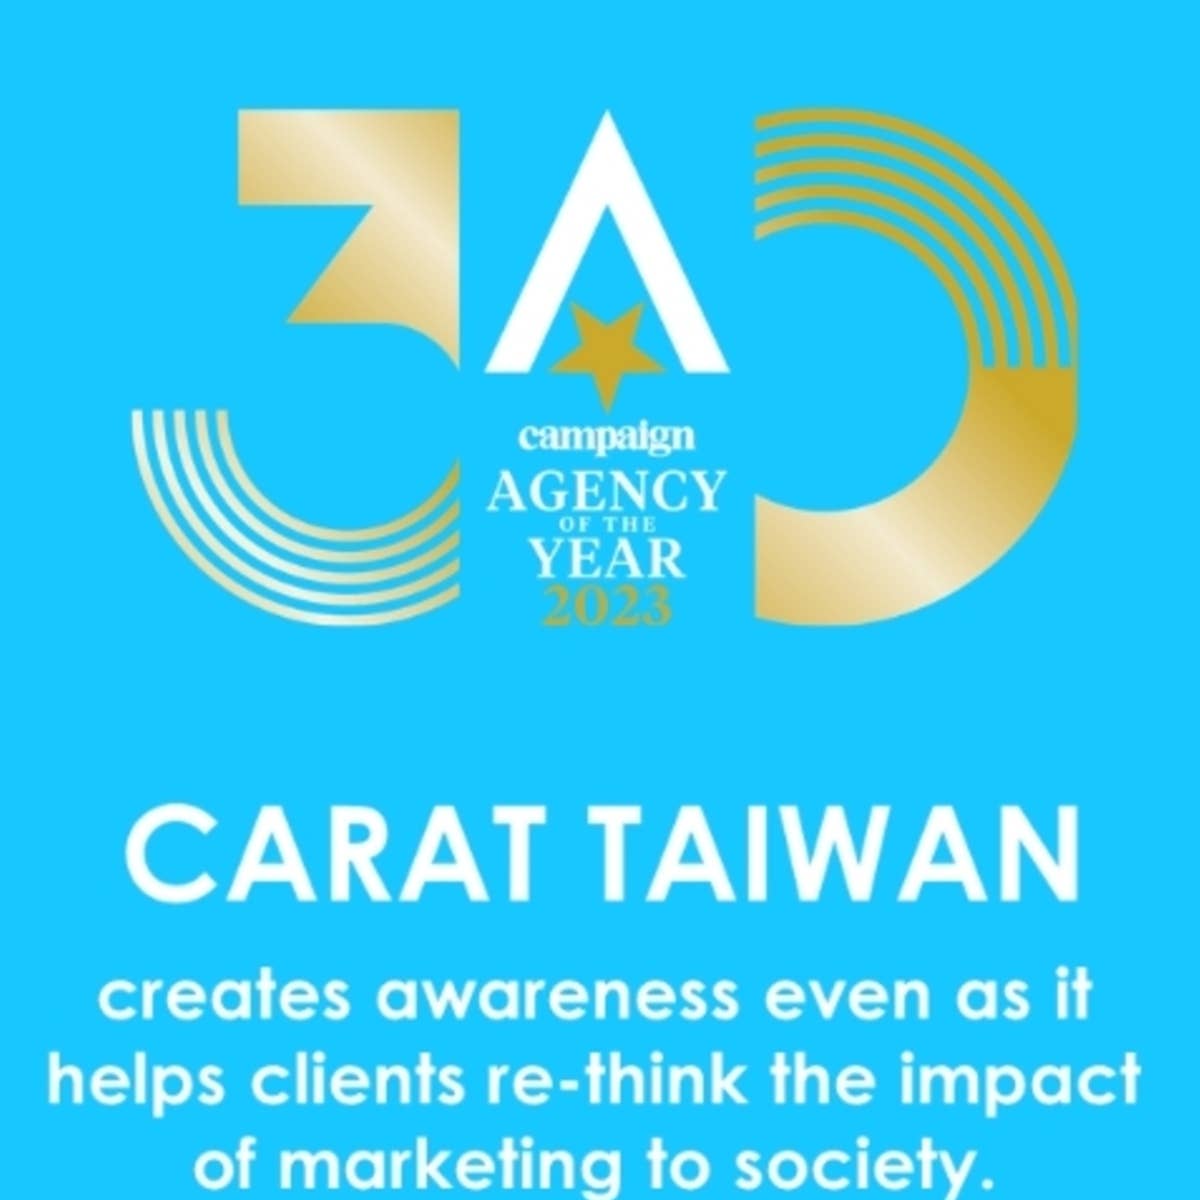 Carat Taiwan Awarded Agency of the Year 2023 by Campaign Asia-Pacific 